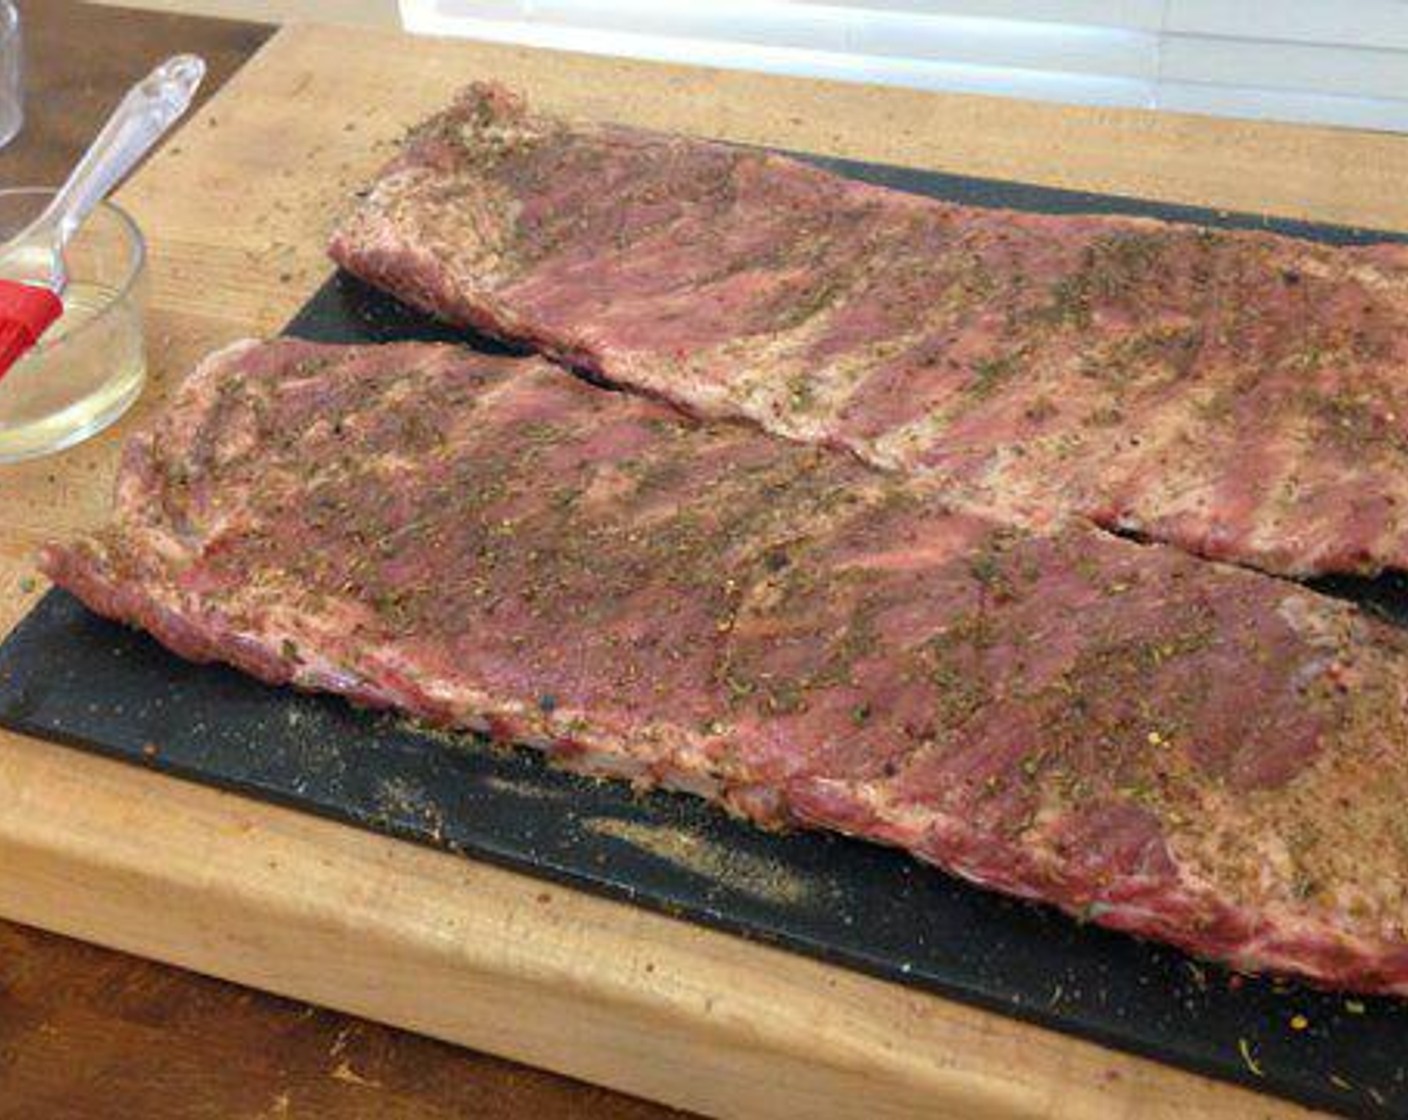 step 4 Sprinkle on the Jerk Seasoning and rub it into the meat. Place the ribs back into the refrigerator to dry marinate for 1-2 hrs.